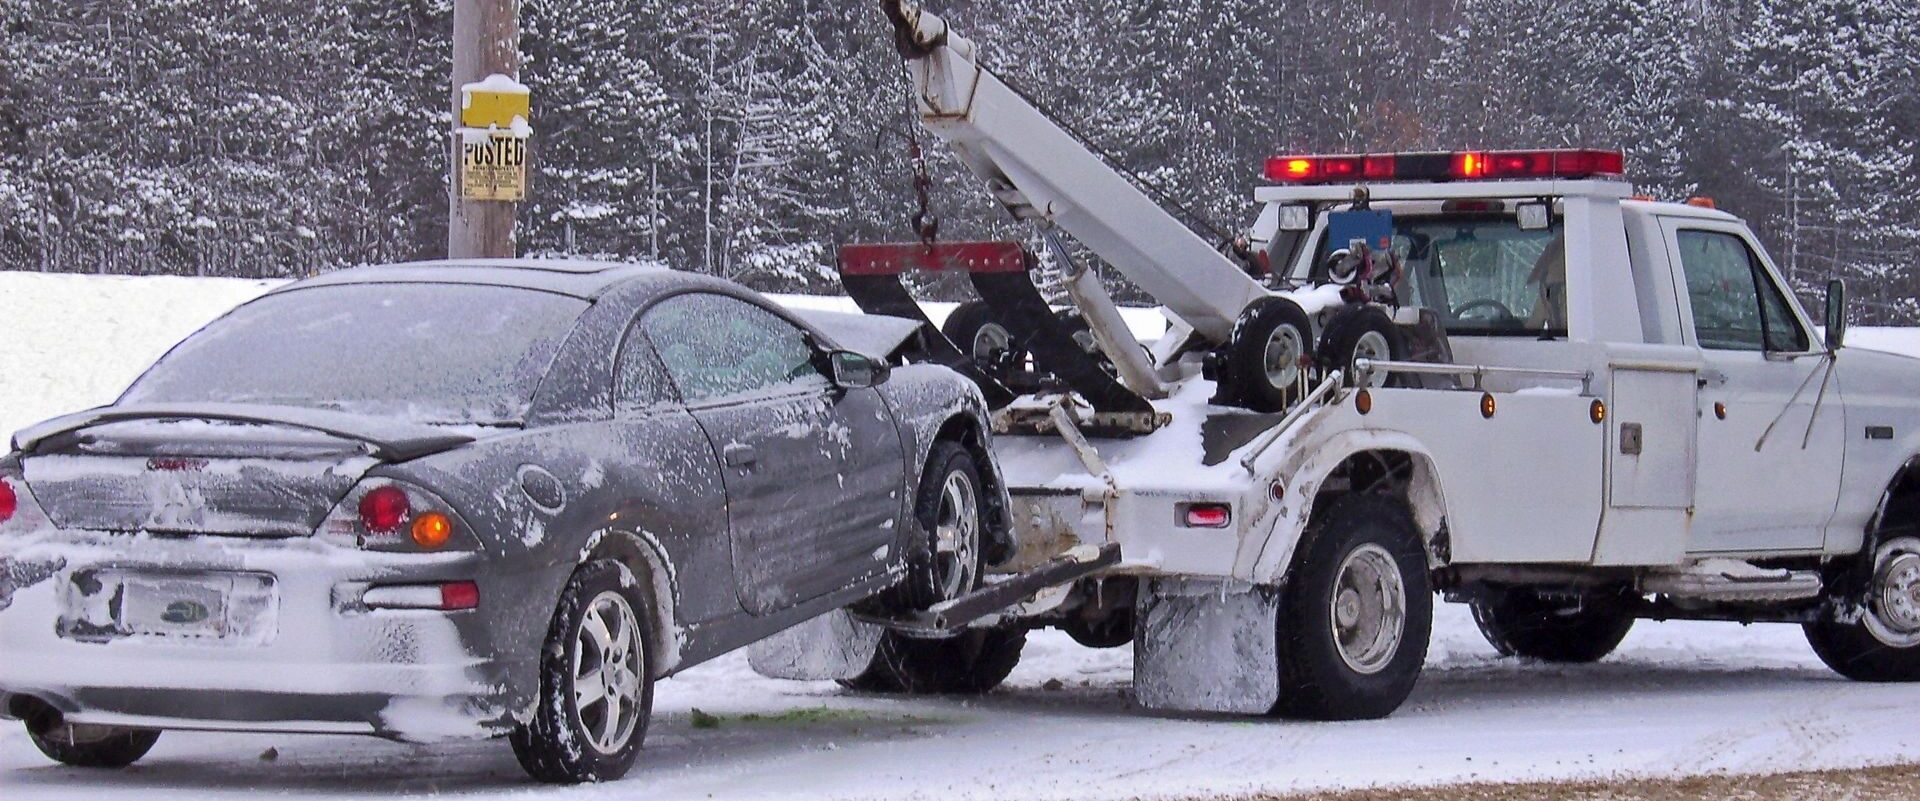 roadside assistance towing